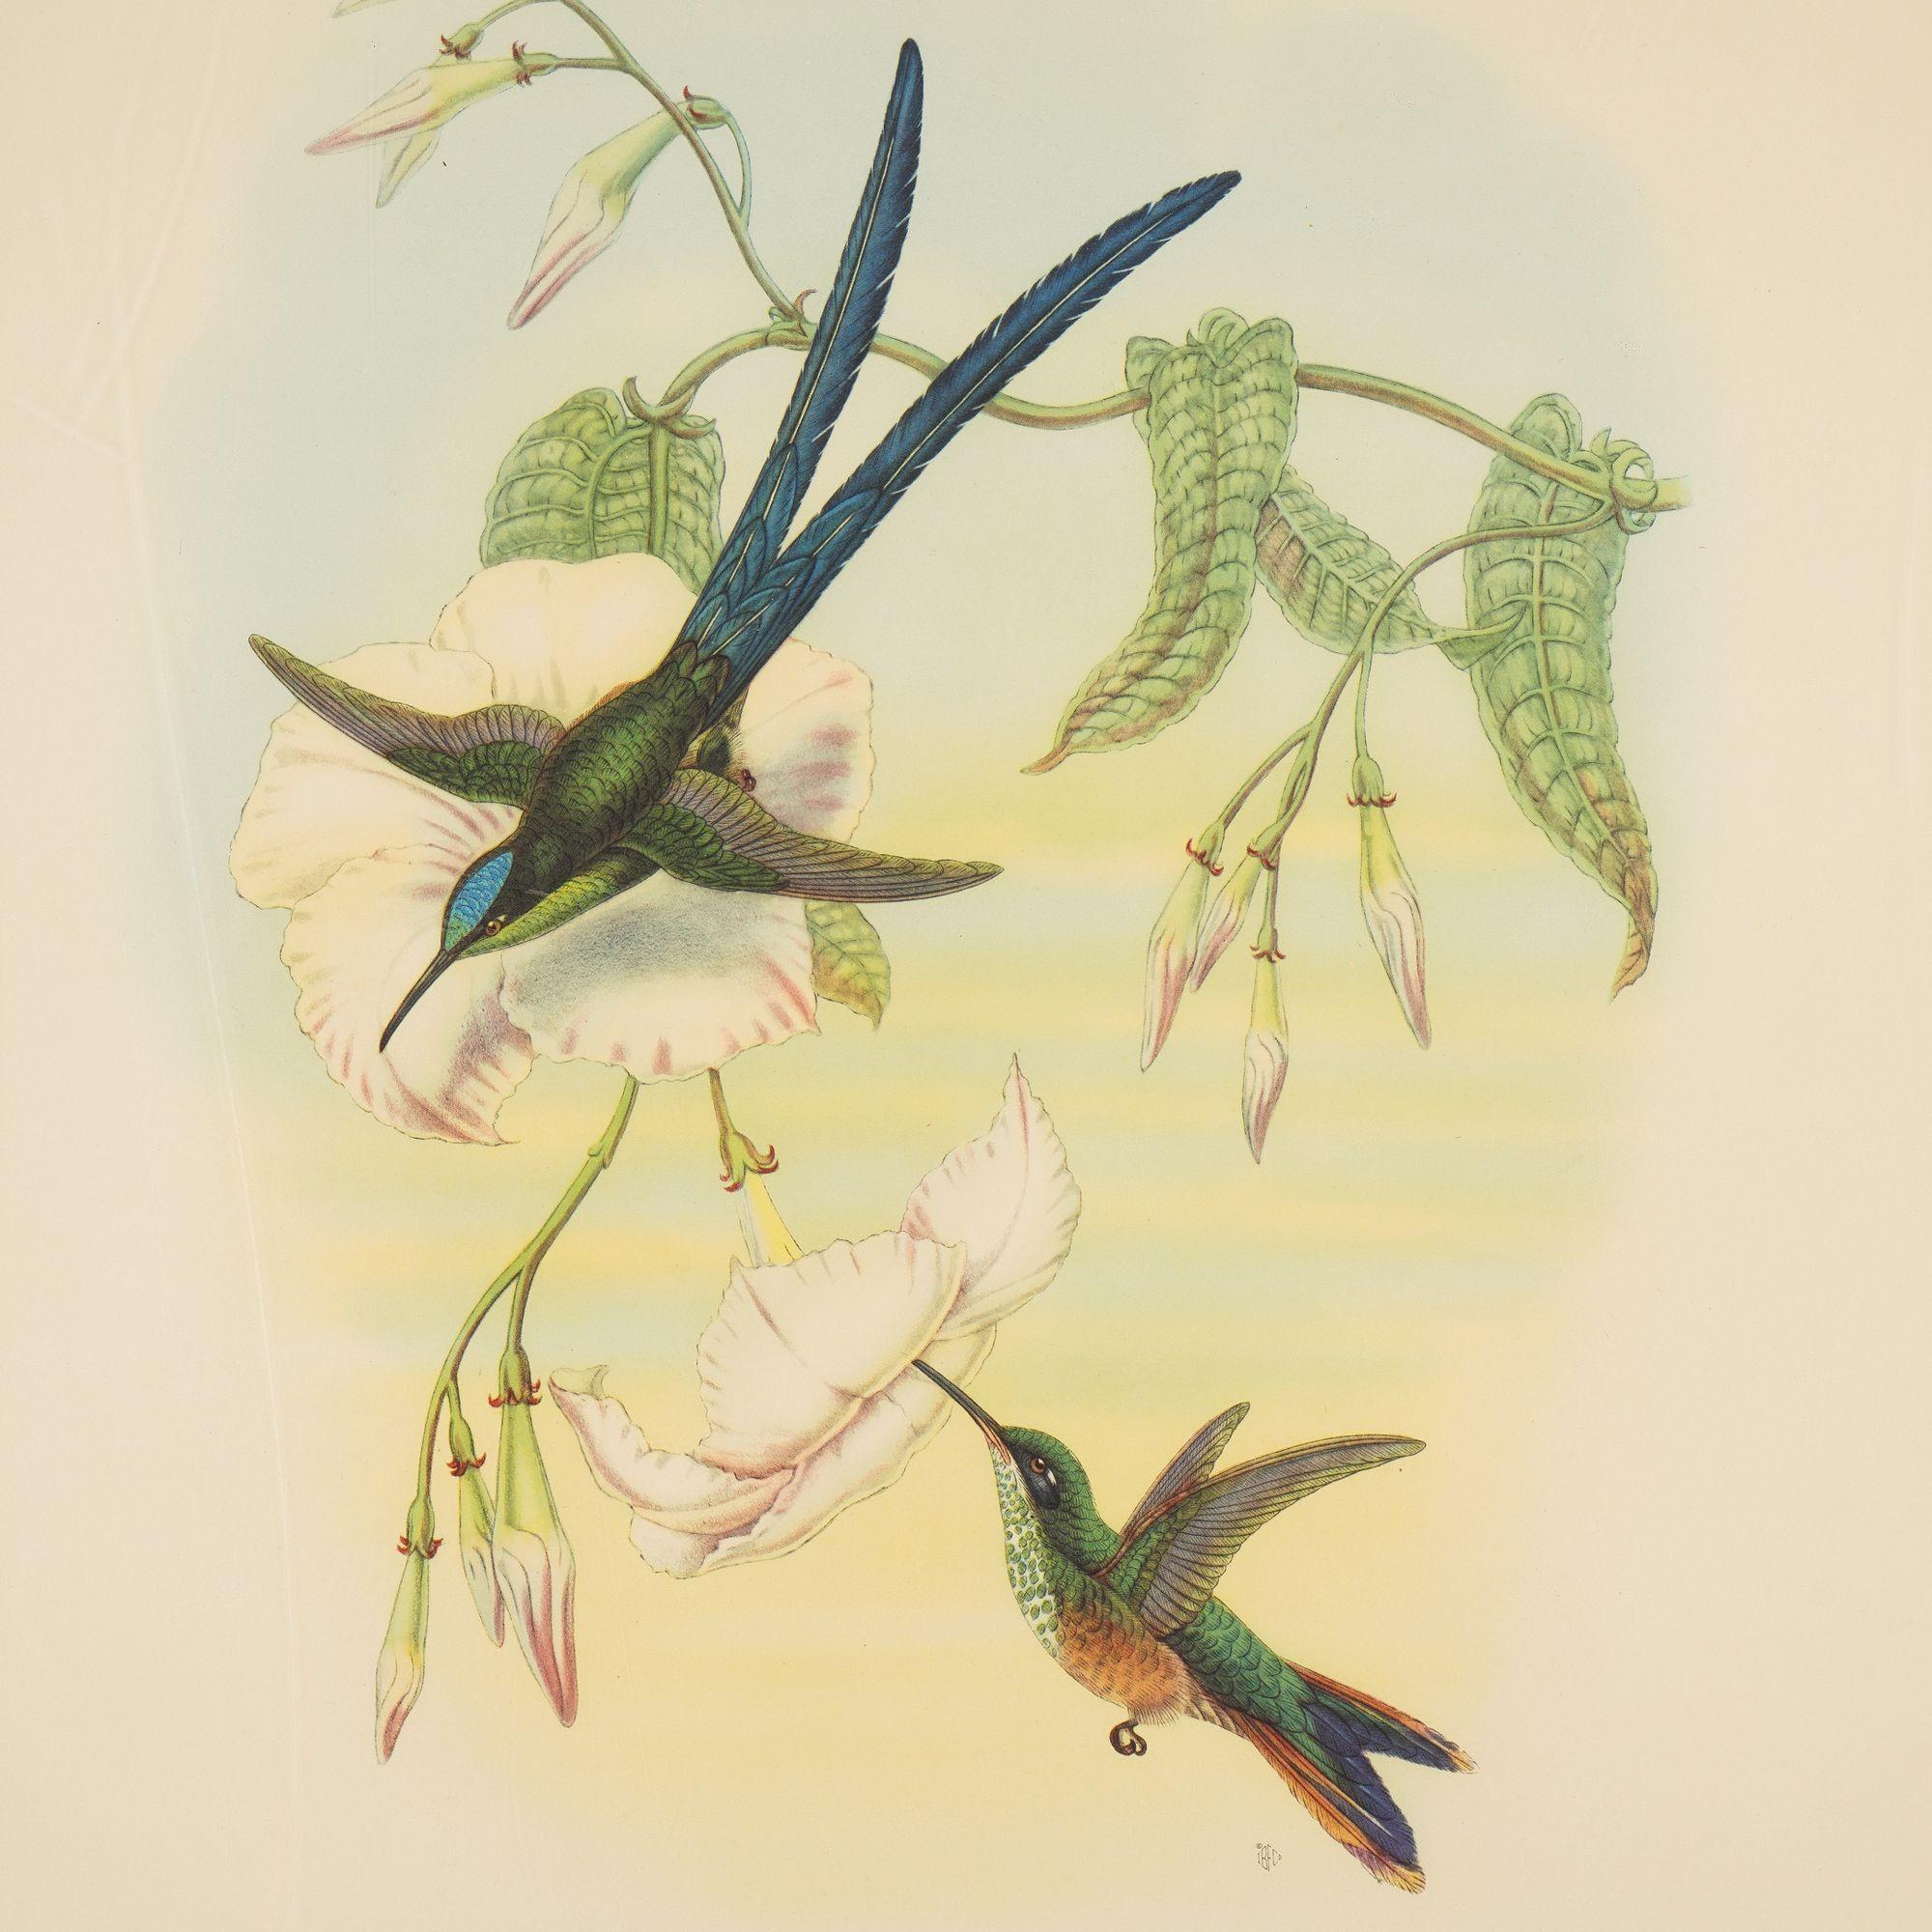 Paper Hylonympha Macrocerca (Scissor-Tailed Hummingbird) by John Gould, 1946 For Sale